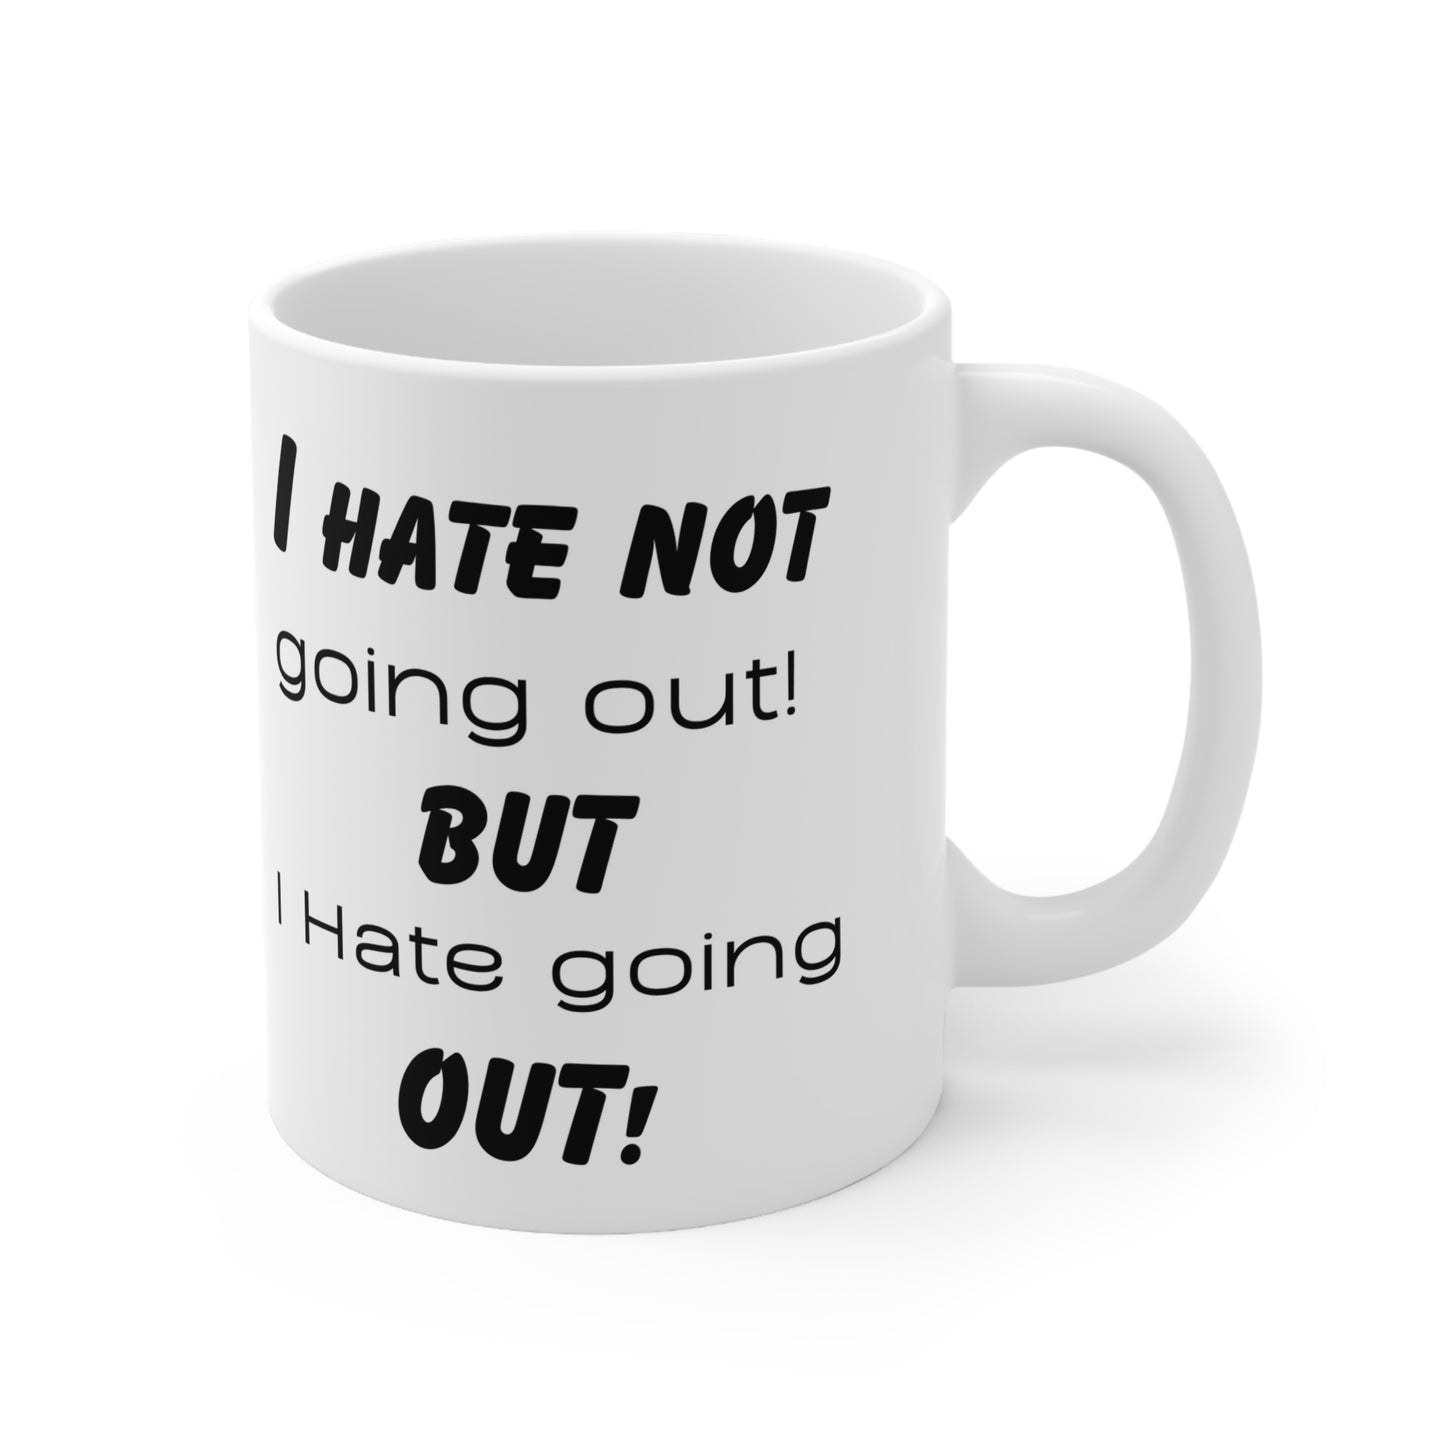 I hate not going, but I hate going out! Ceramic Coffee Cups, 11oz, 15oz